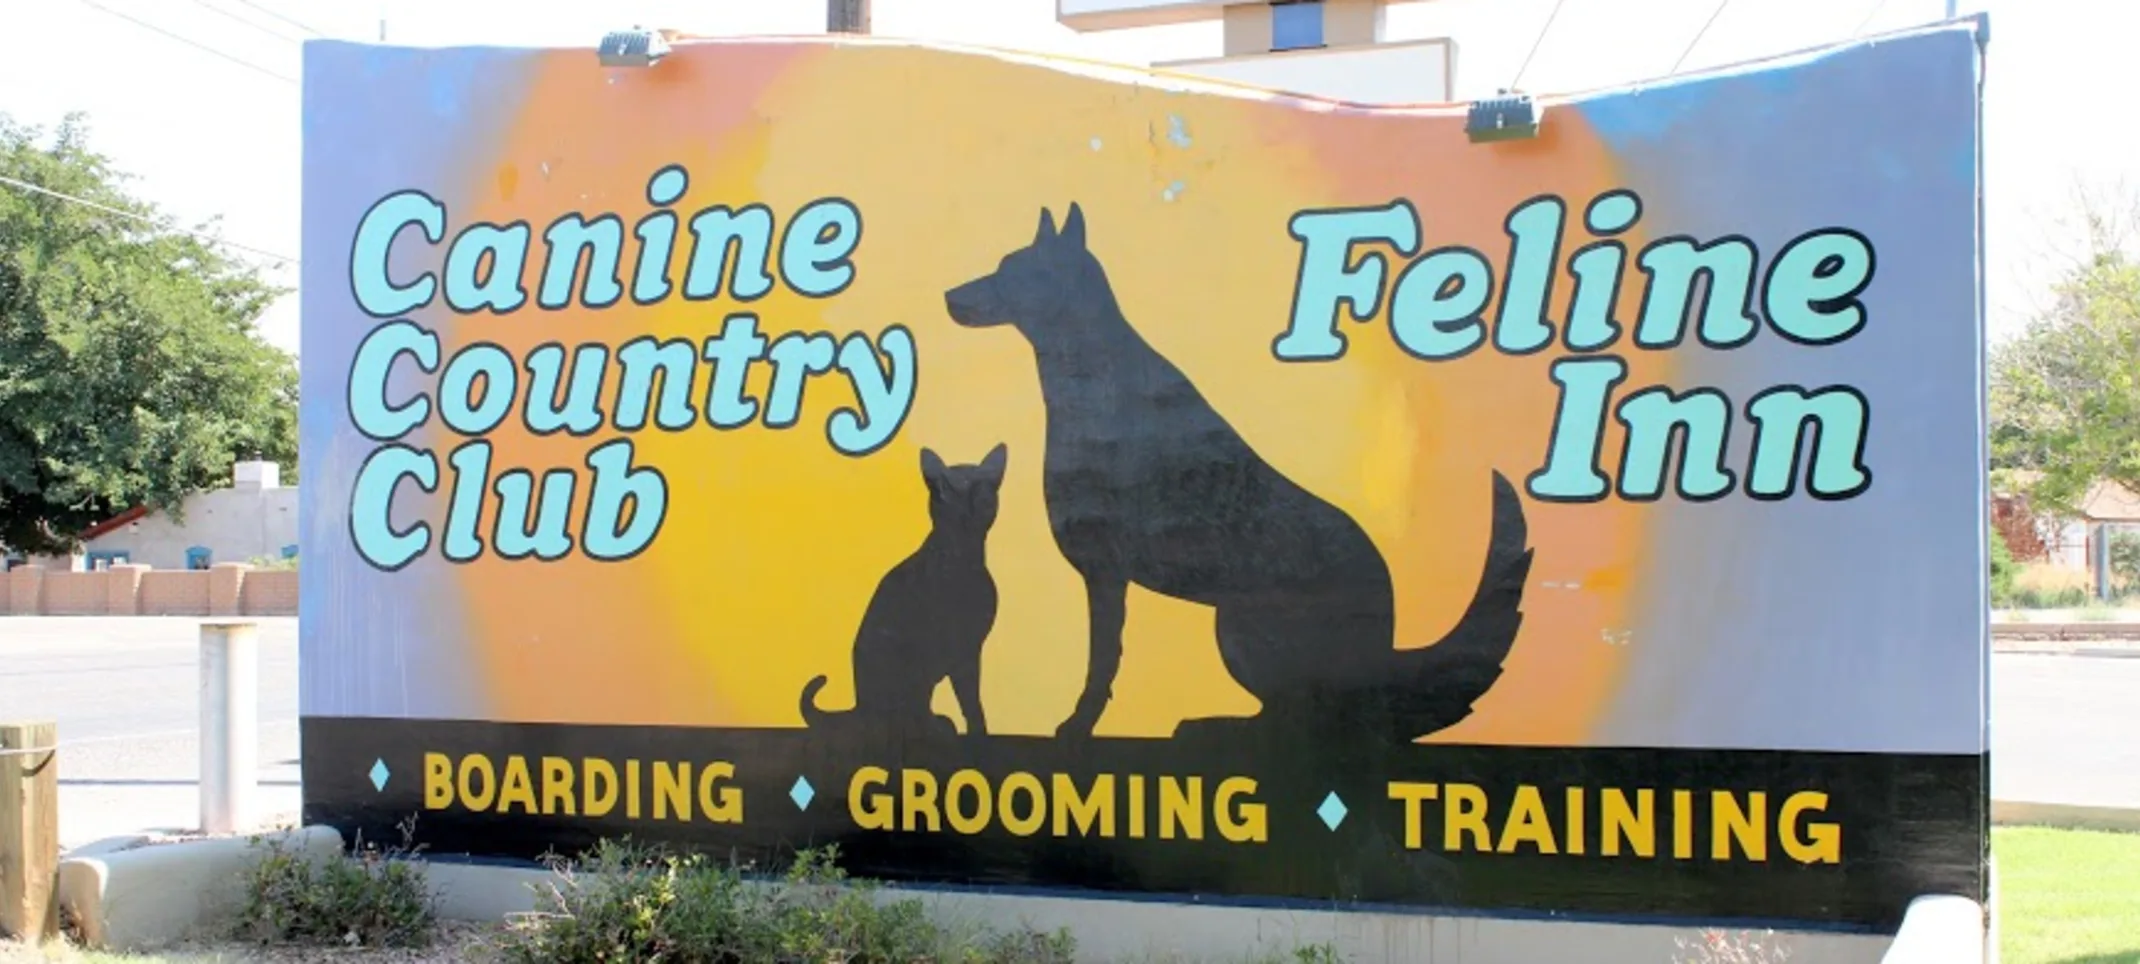 Canine Country Club & Feline Inn- North Valley Sign